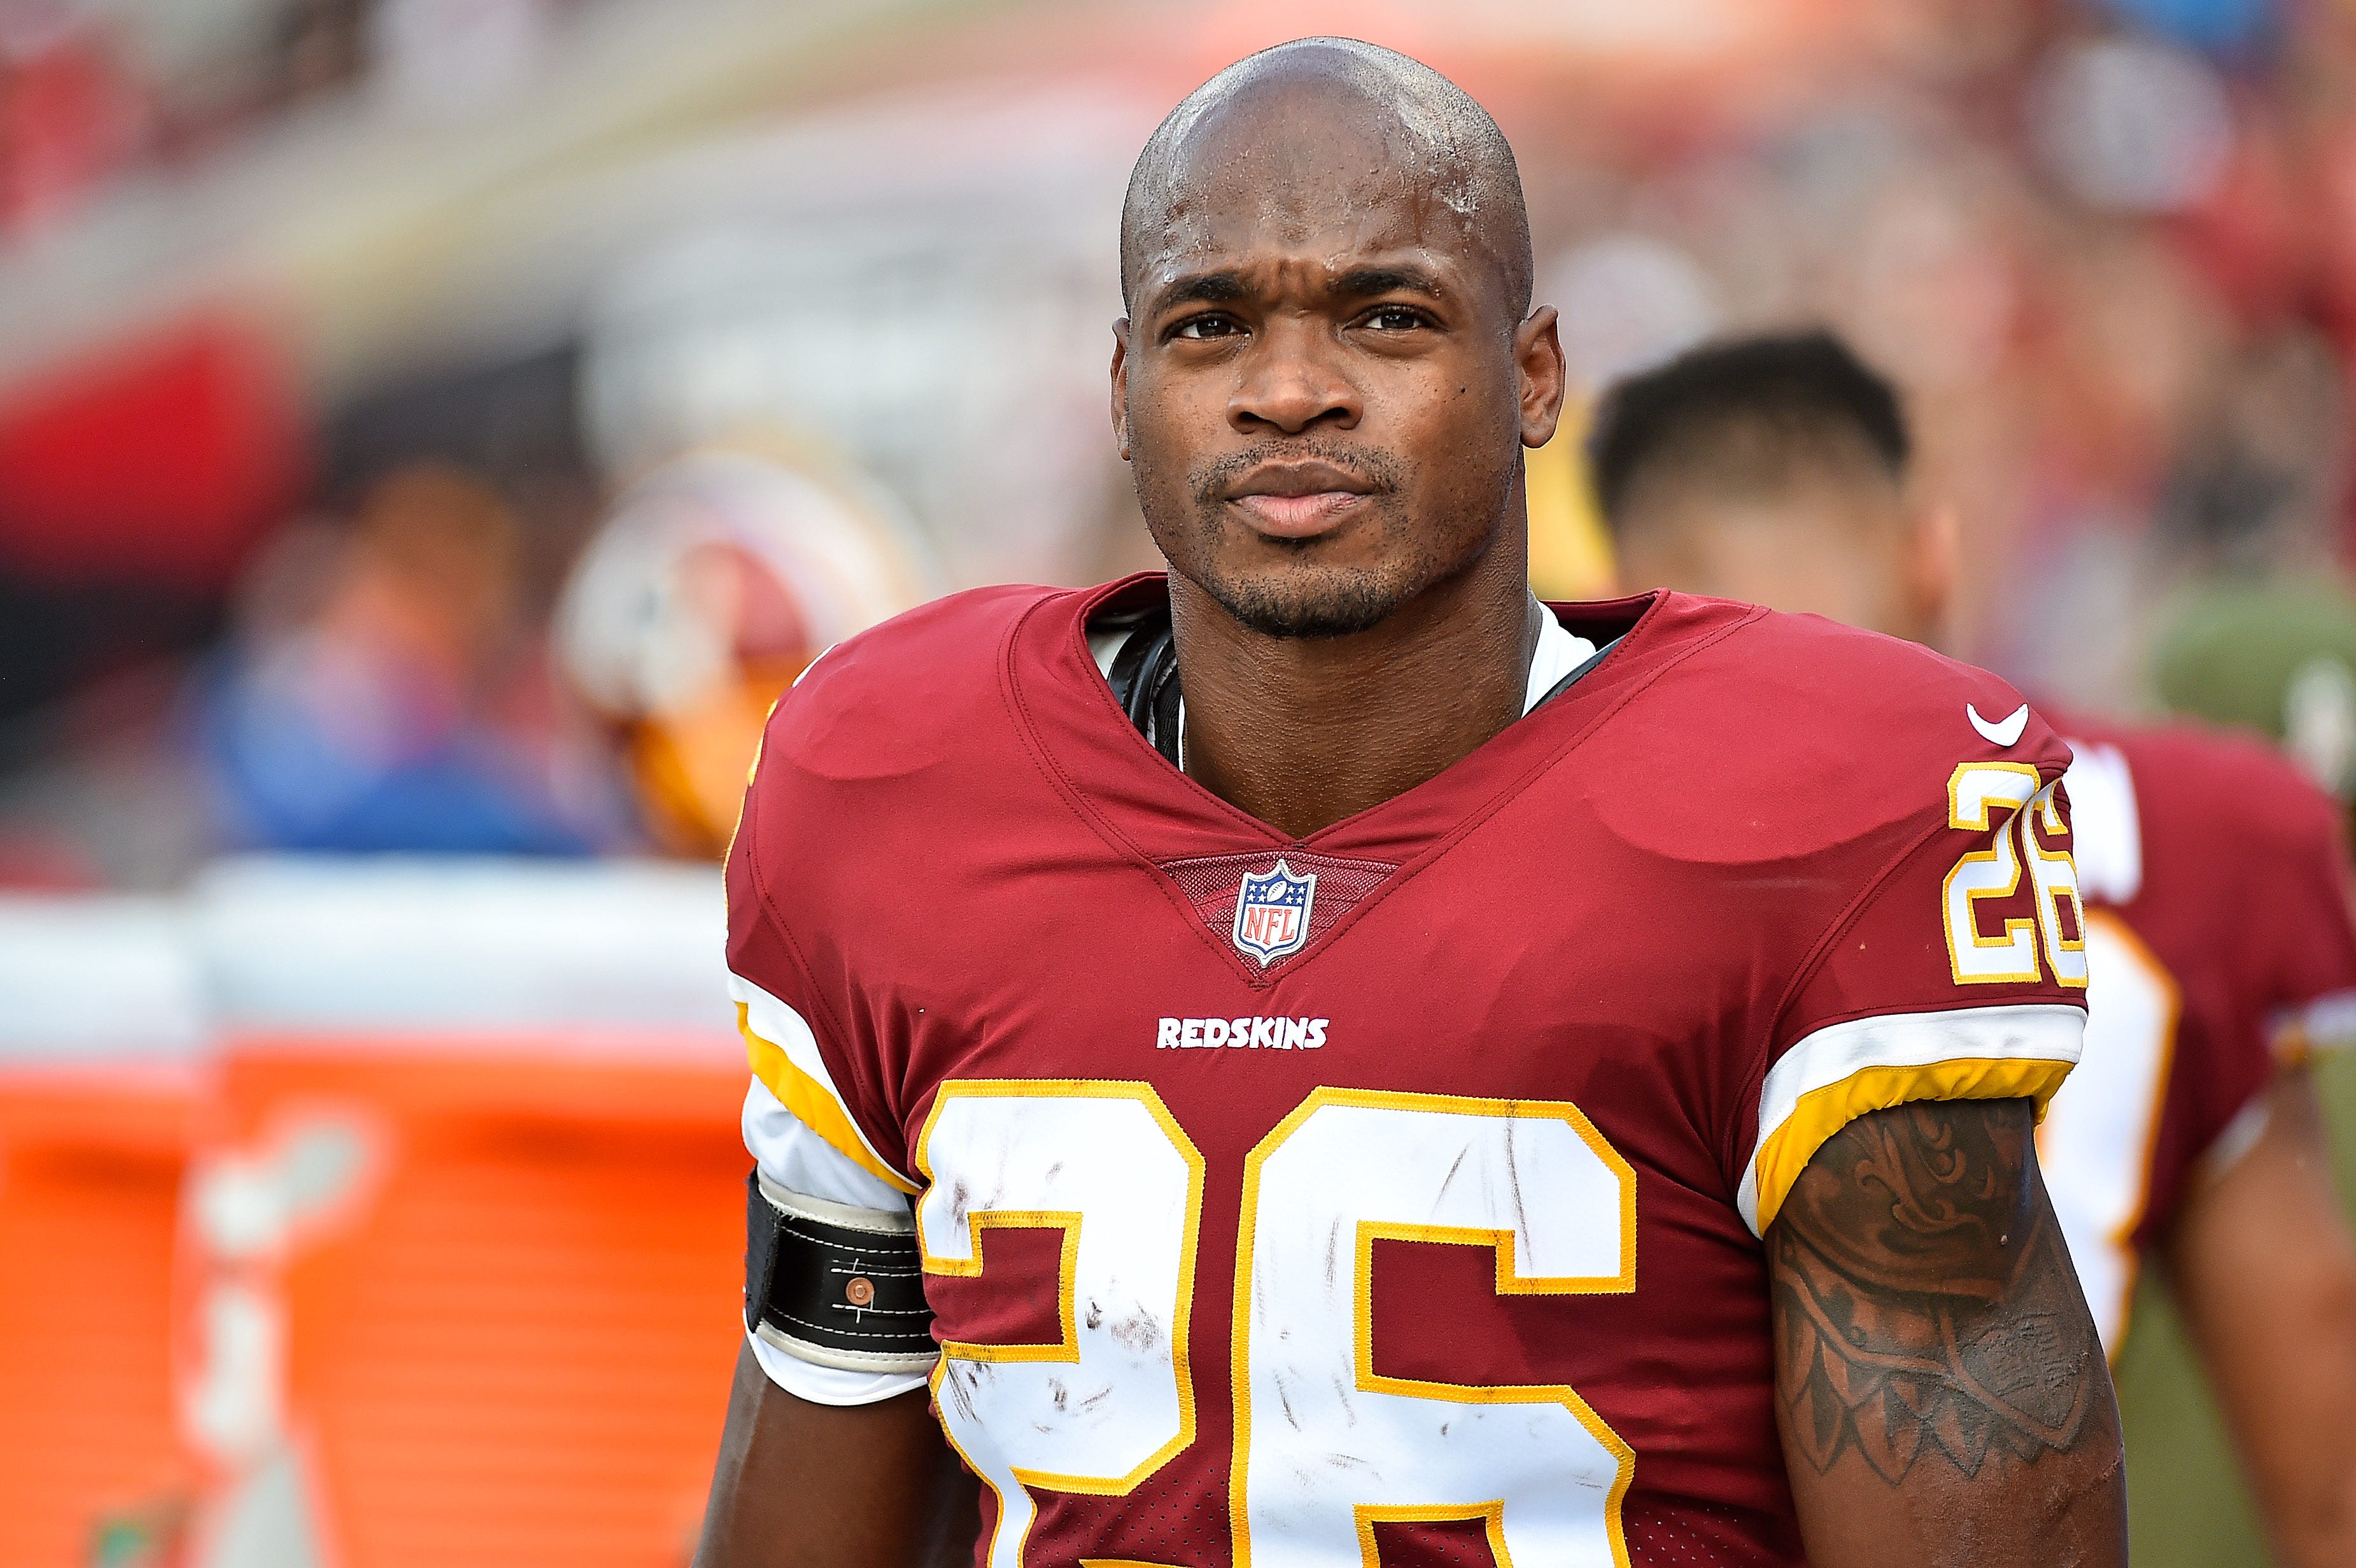 NFL: Adrian Peterson yet to learn child abuse unacceptable